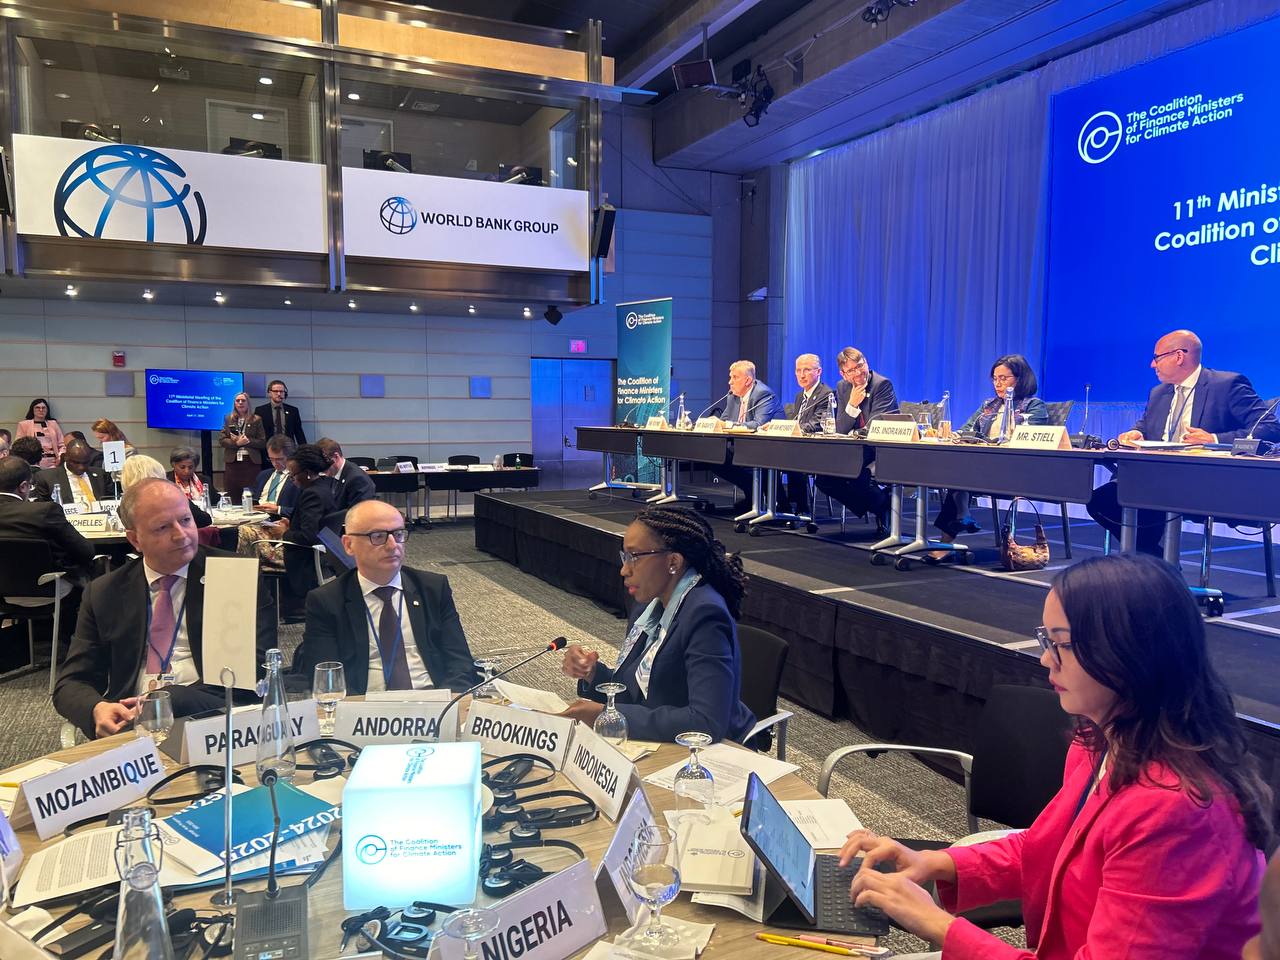 Lados participates in the 11th meeting of the Alliance of Finance Ministers for Climate Action